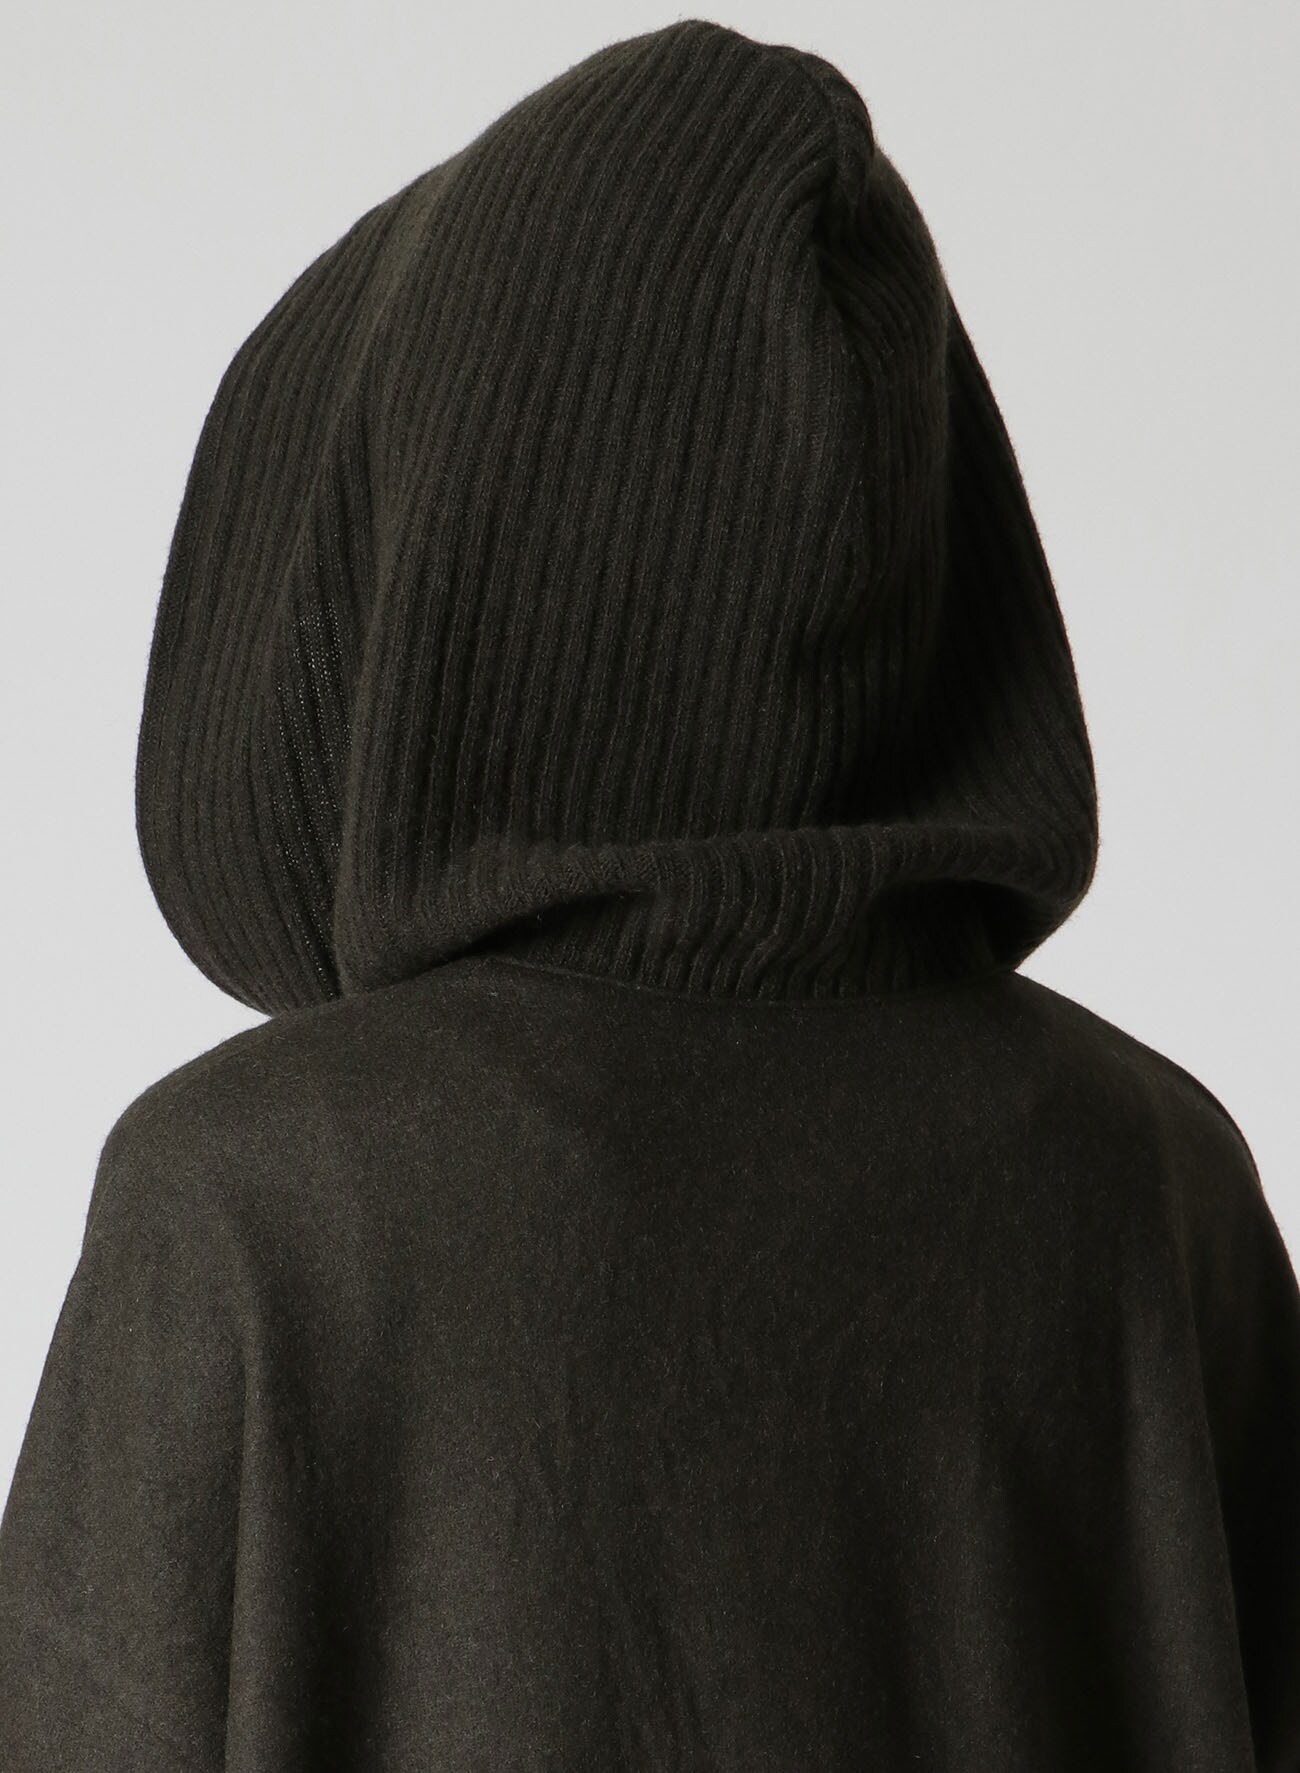 MIDDLE PLAIN STITCH BUTTON HOODED LONG T